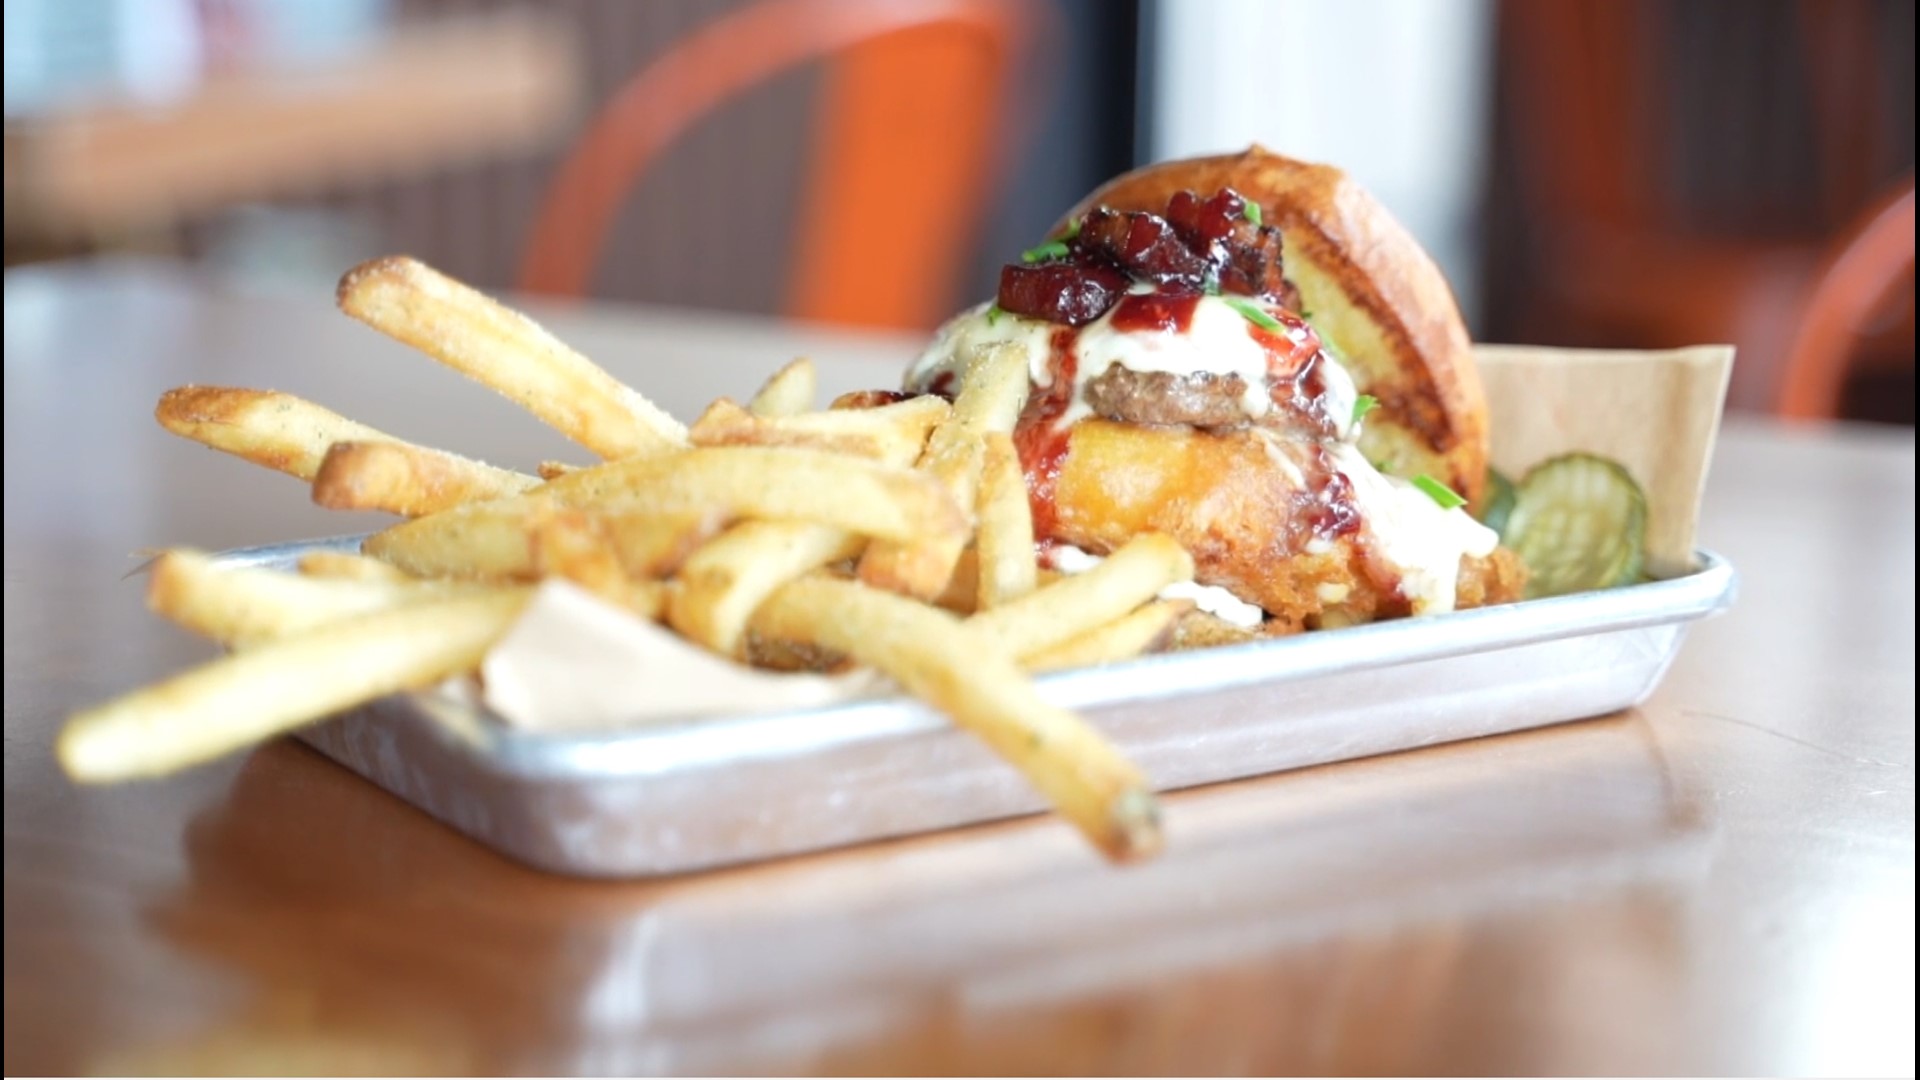 Two dollars from every charity burger sold this month at the Tipsy Steer will go to the nonprofit Wishes and More, which grants wishes to terminally ill children.